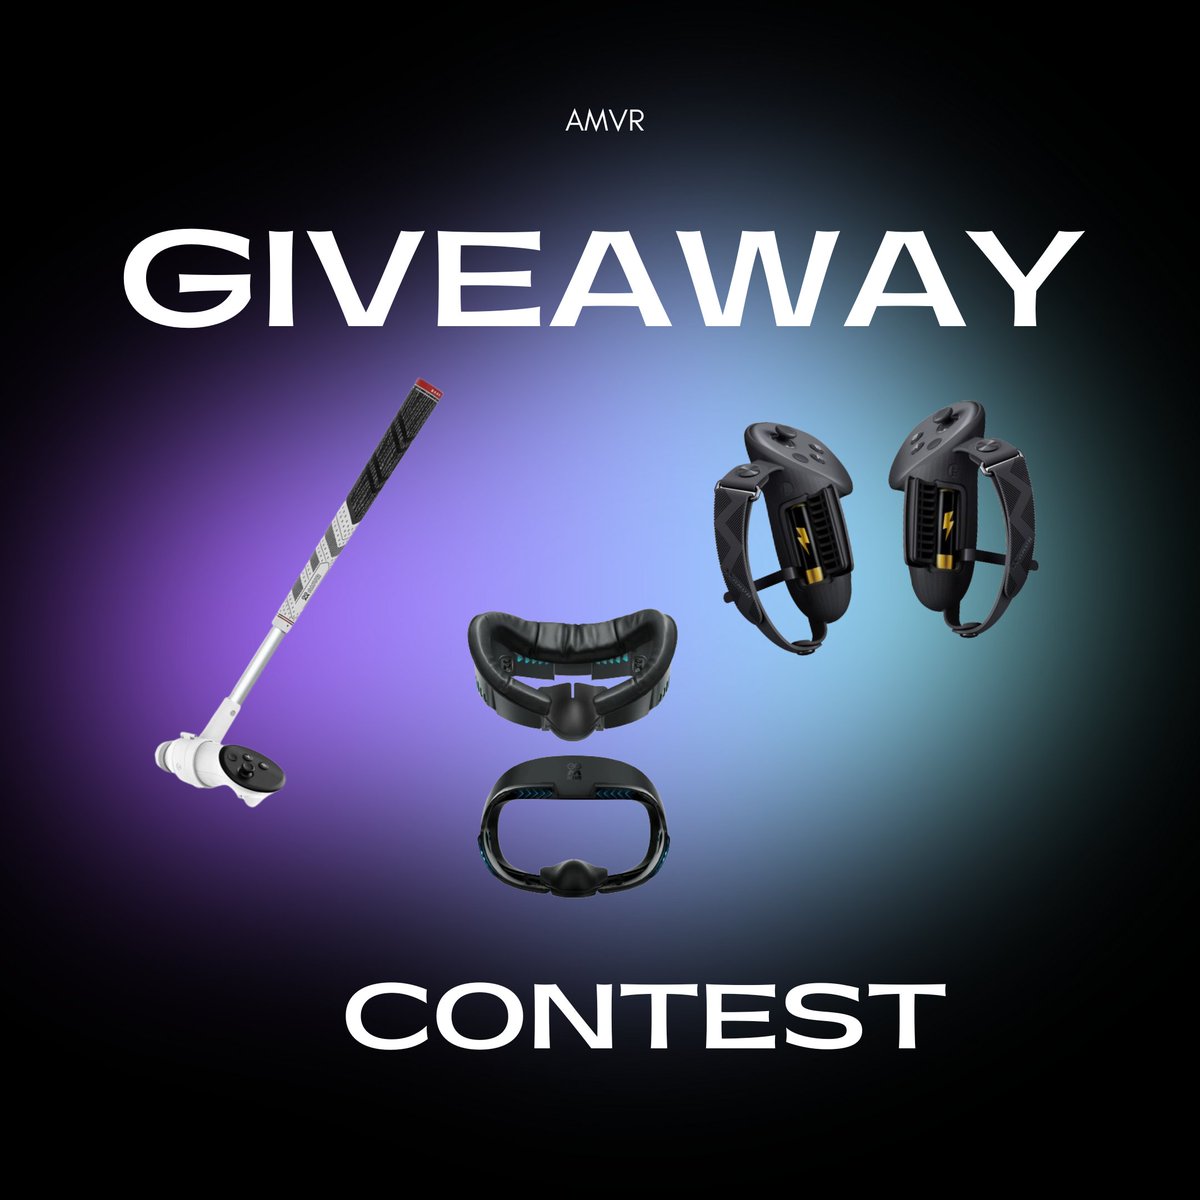 Giveaway Contest!!🚨 We want to hear from you! Participation is simple, just three steps 1⃣Follow @AmvrOfficial 2⃣Reply to this post with your most satisfying Quest 3 upgrade moment 3⃣ Like & Retweet this post 🎁Random 3 entries get a #Quest3 accessories!